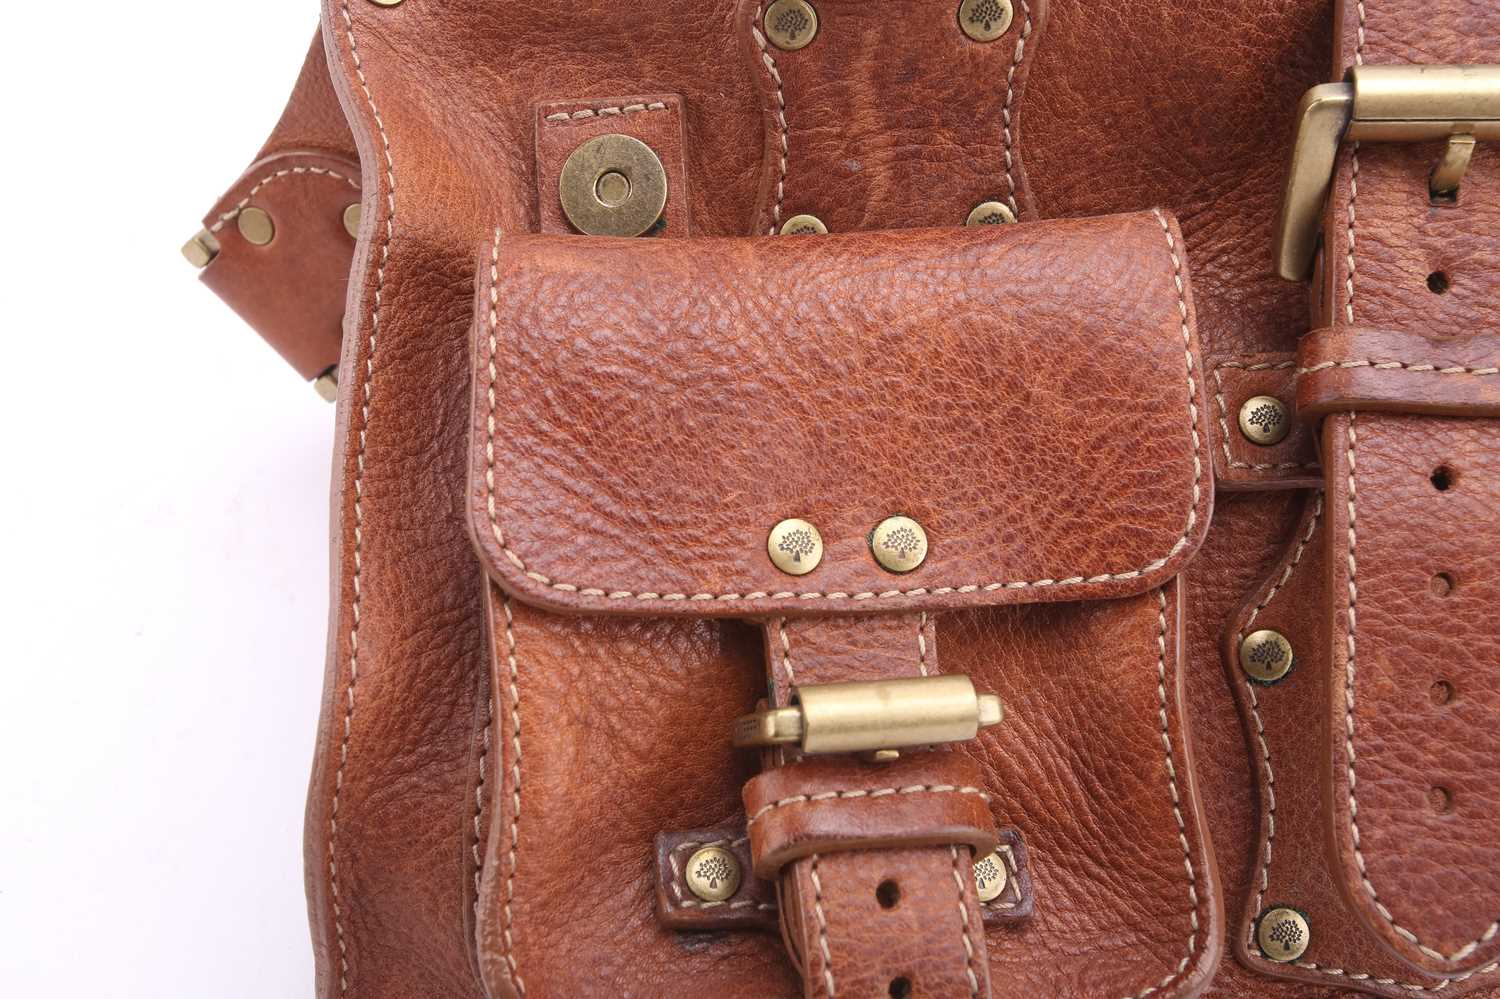 Mulberry - 'Roxanne' satchel in tanned leather, with external pockets, belt closure, equipped with - Image 6 of 9